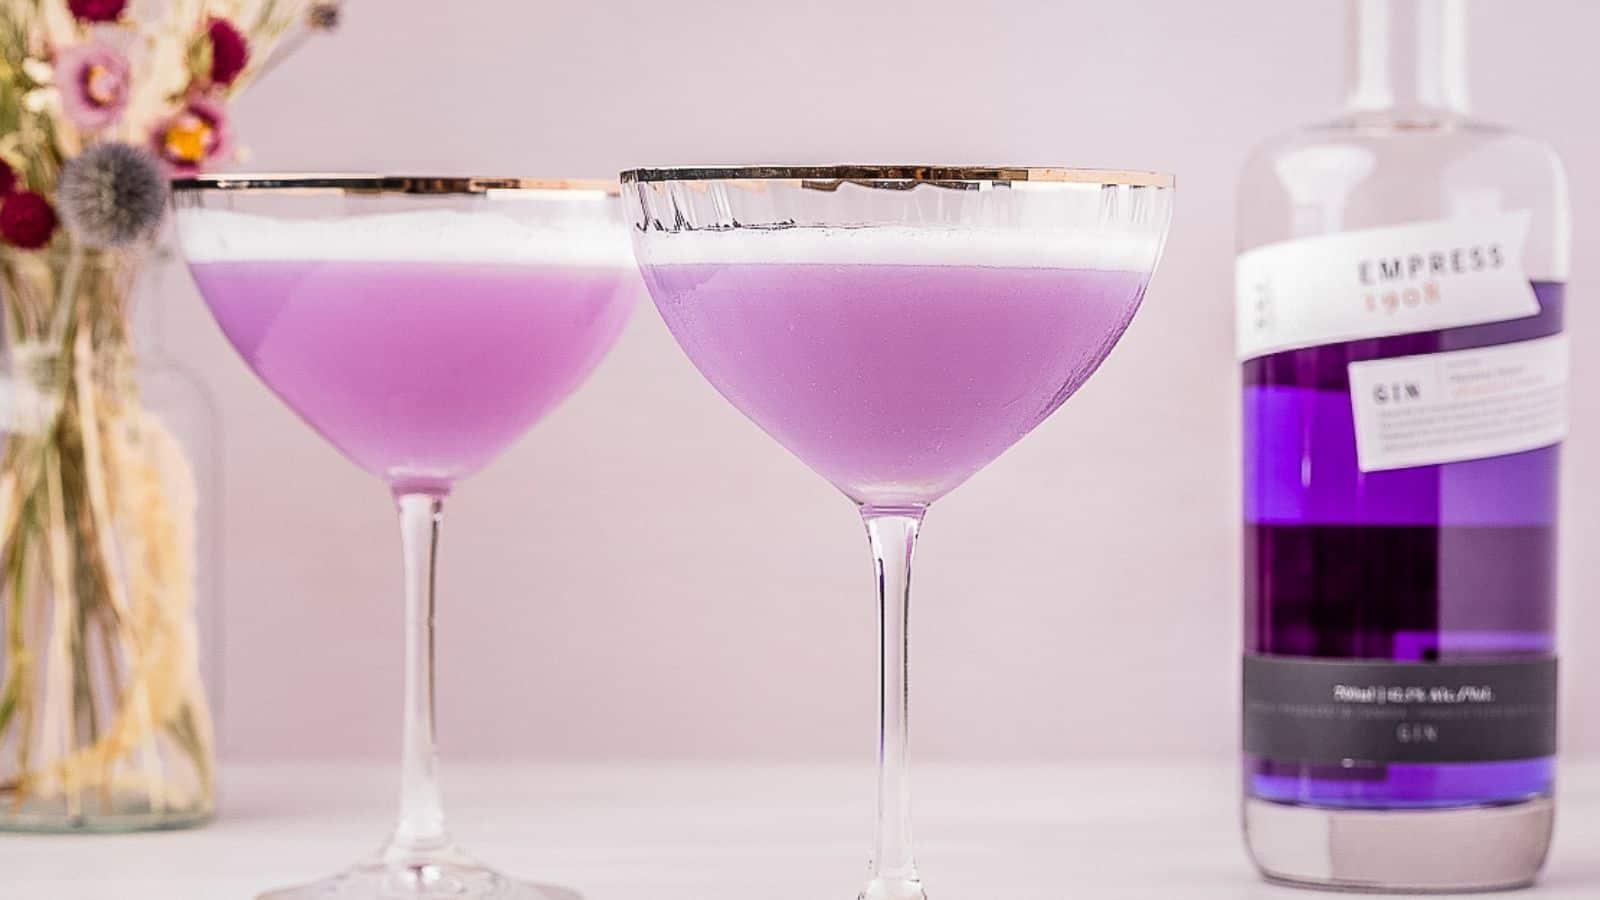 <p>Make an Empress 1908 Gin Sour for a classy drink with a tangy taste. You only need a few ingredients, including Empress 1908 Gin known for its beautiful color. It’s smooth and tangy, great for when you want something fancy. Takes about 5 minutes to prepare, so you can enjoy its elegance without delay.<br><strong>Get the Recipe: </strong><a href="https://reneenicoleskitchen.com/empress-1908-gin-sour-cocktail/?utm_source=msn&utm_medium=page&utm_campaign=10%20classic%20cocktails%20&%20mocktails%20you%20should%20know%20how%20to%20make">Empress 1908 Gin Sour Cocktail</a></p>